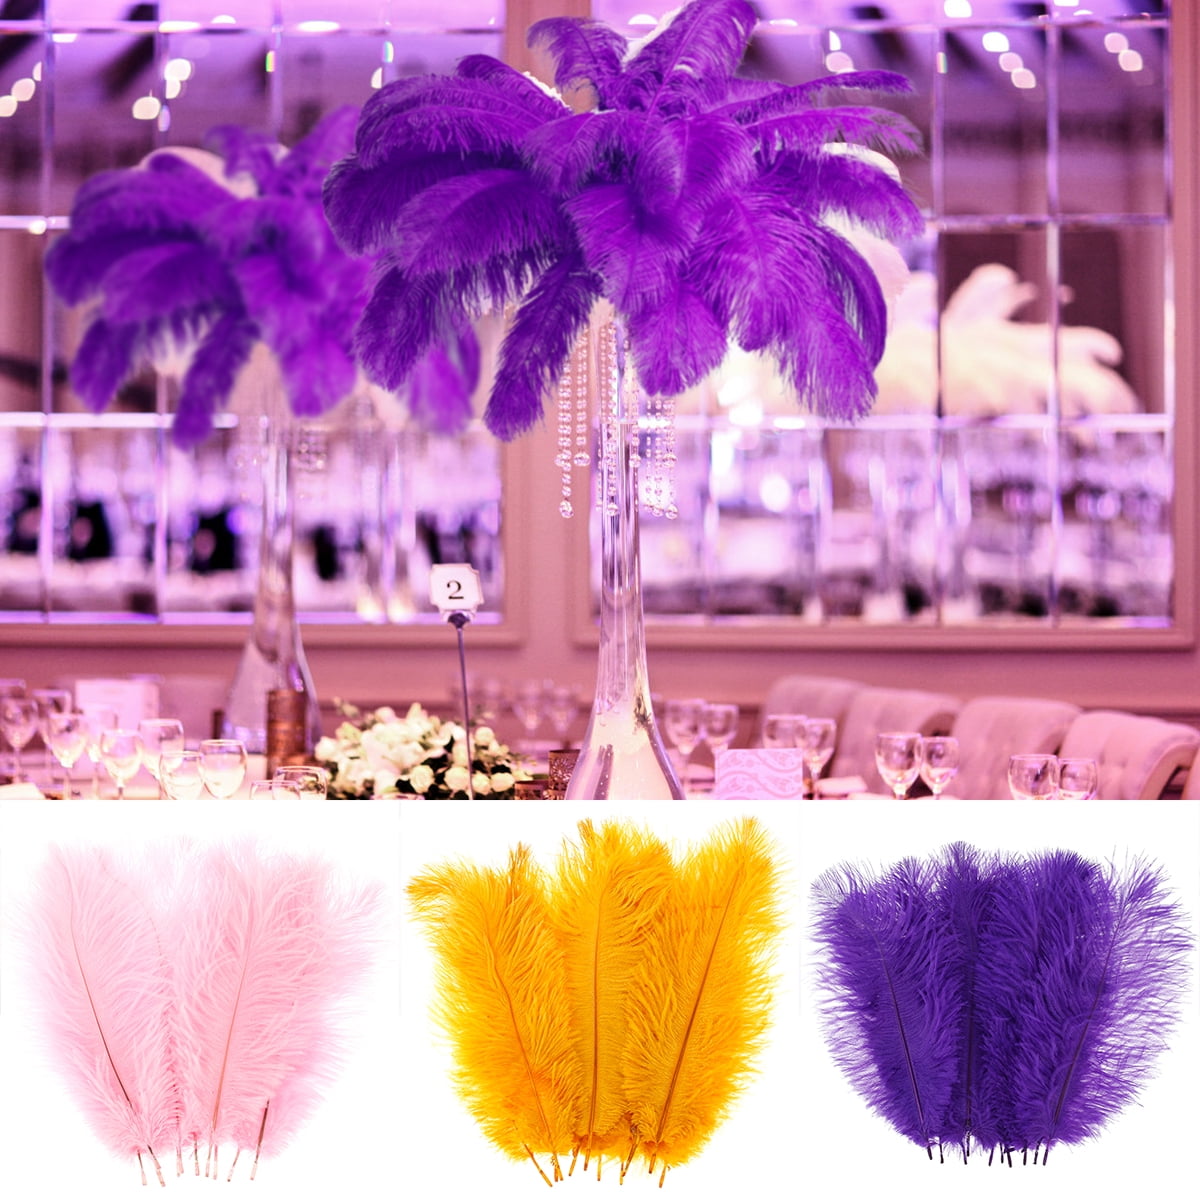 50pcs Dark Pink Ostrich Feathers Bulk for Wedding Party Home Table  Centerpiece Ostrich Plume Vases Home Decor Craft Accessories